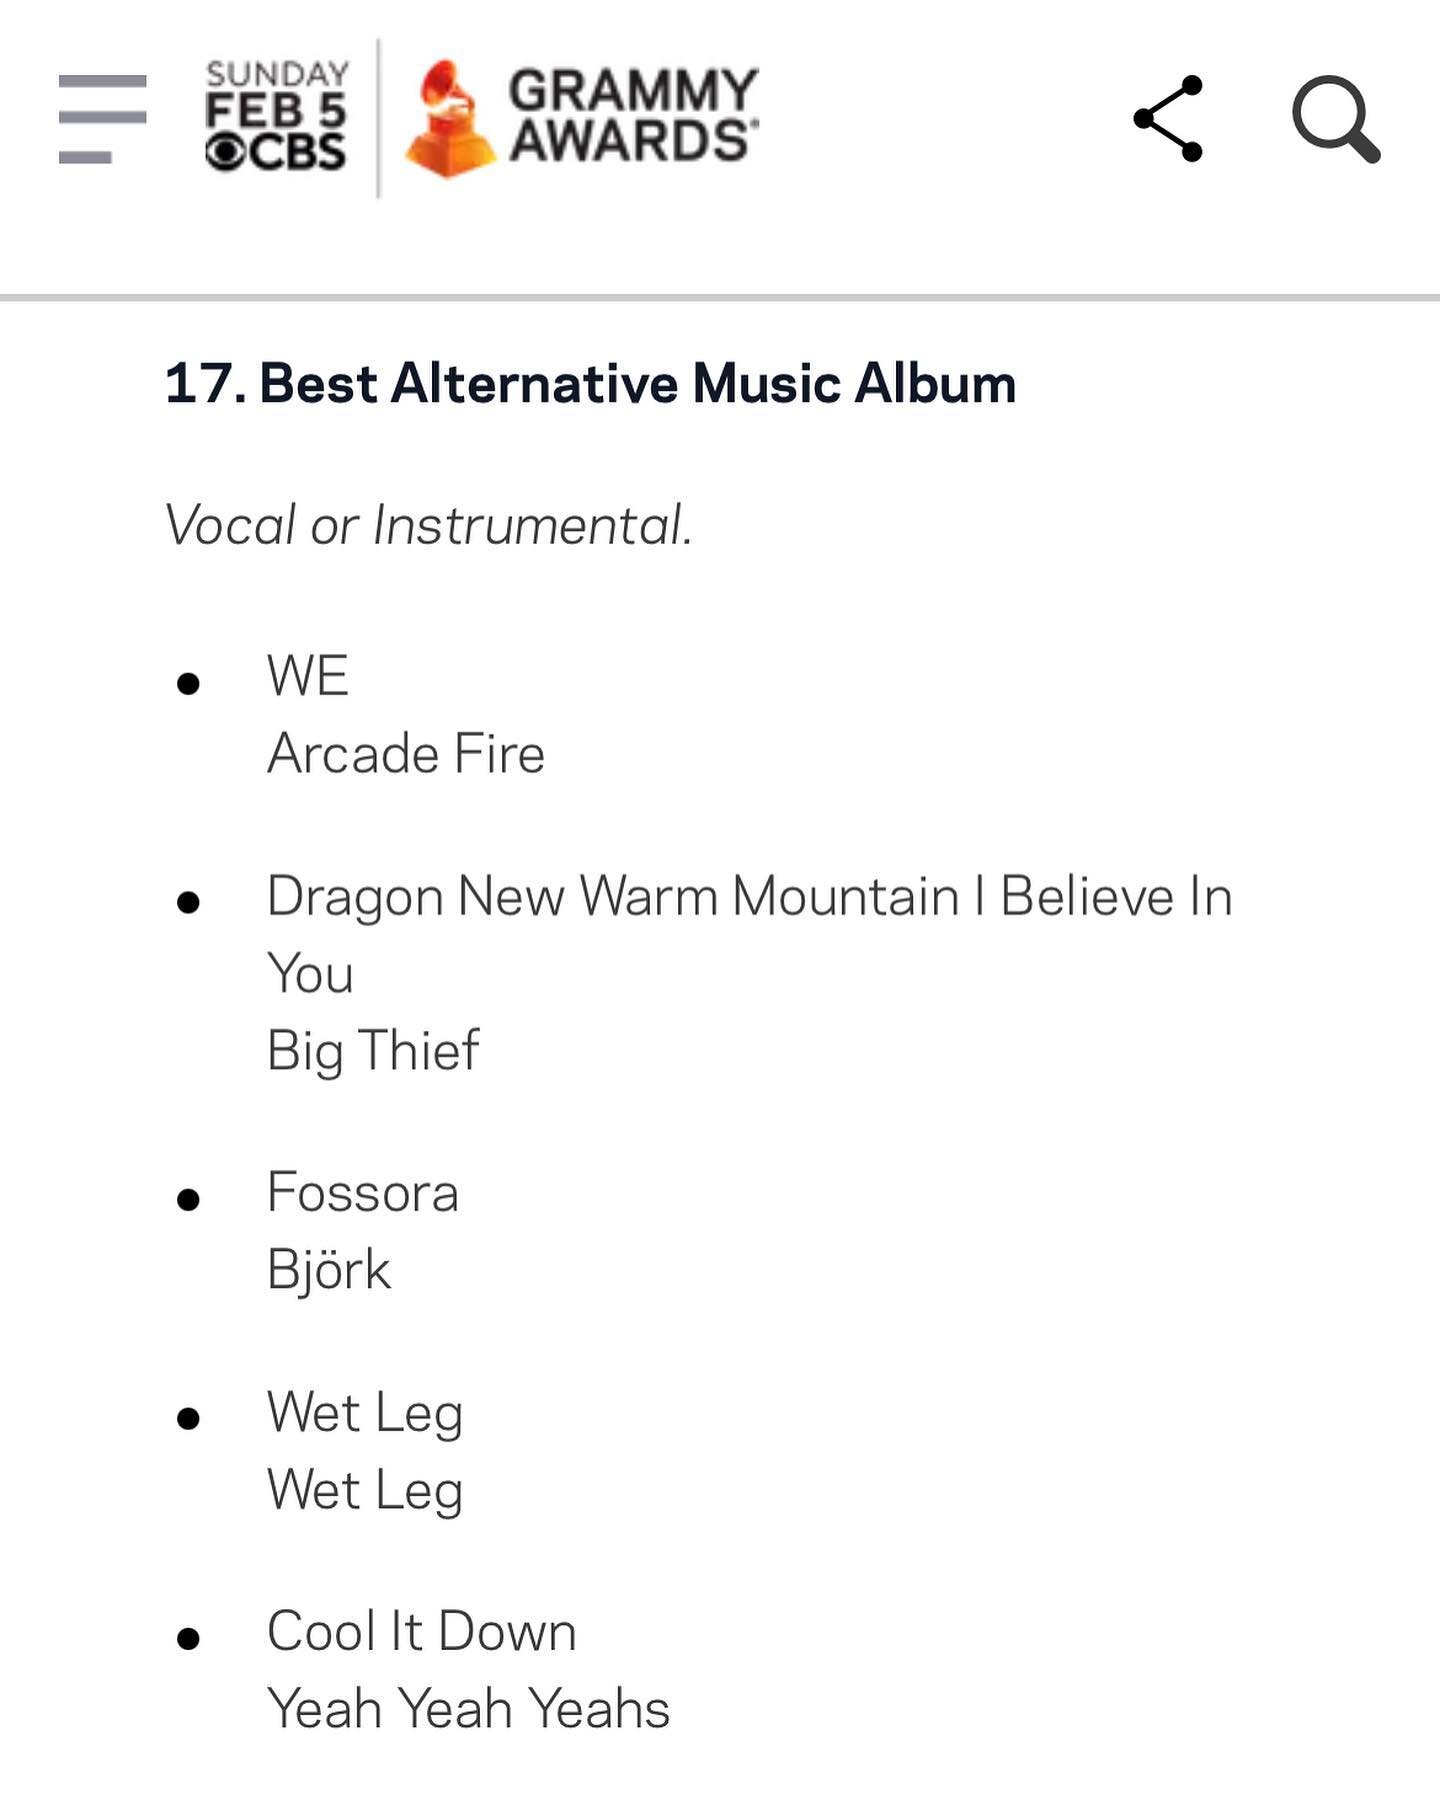 We are very pleased to see &ldquo;We&rdquo;, the fabulous album from Arcade Fire, nominated from Best Alternative album at this years Grammy awards. 

The album was mixed by our studio neighbour @craigsilveymusic , with the Atmos mixes done right her